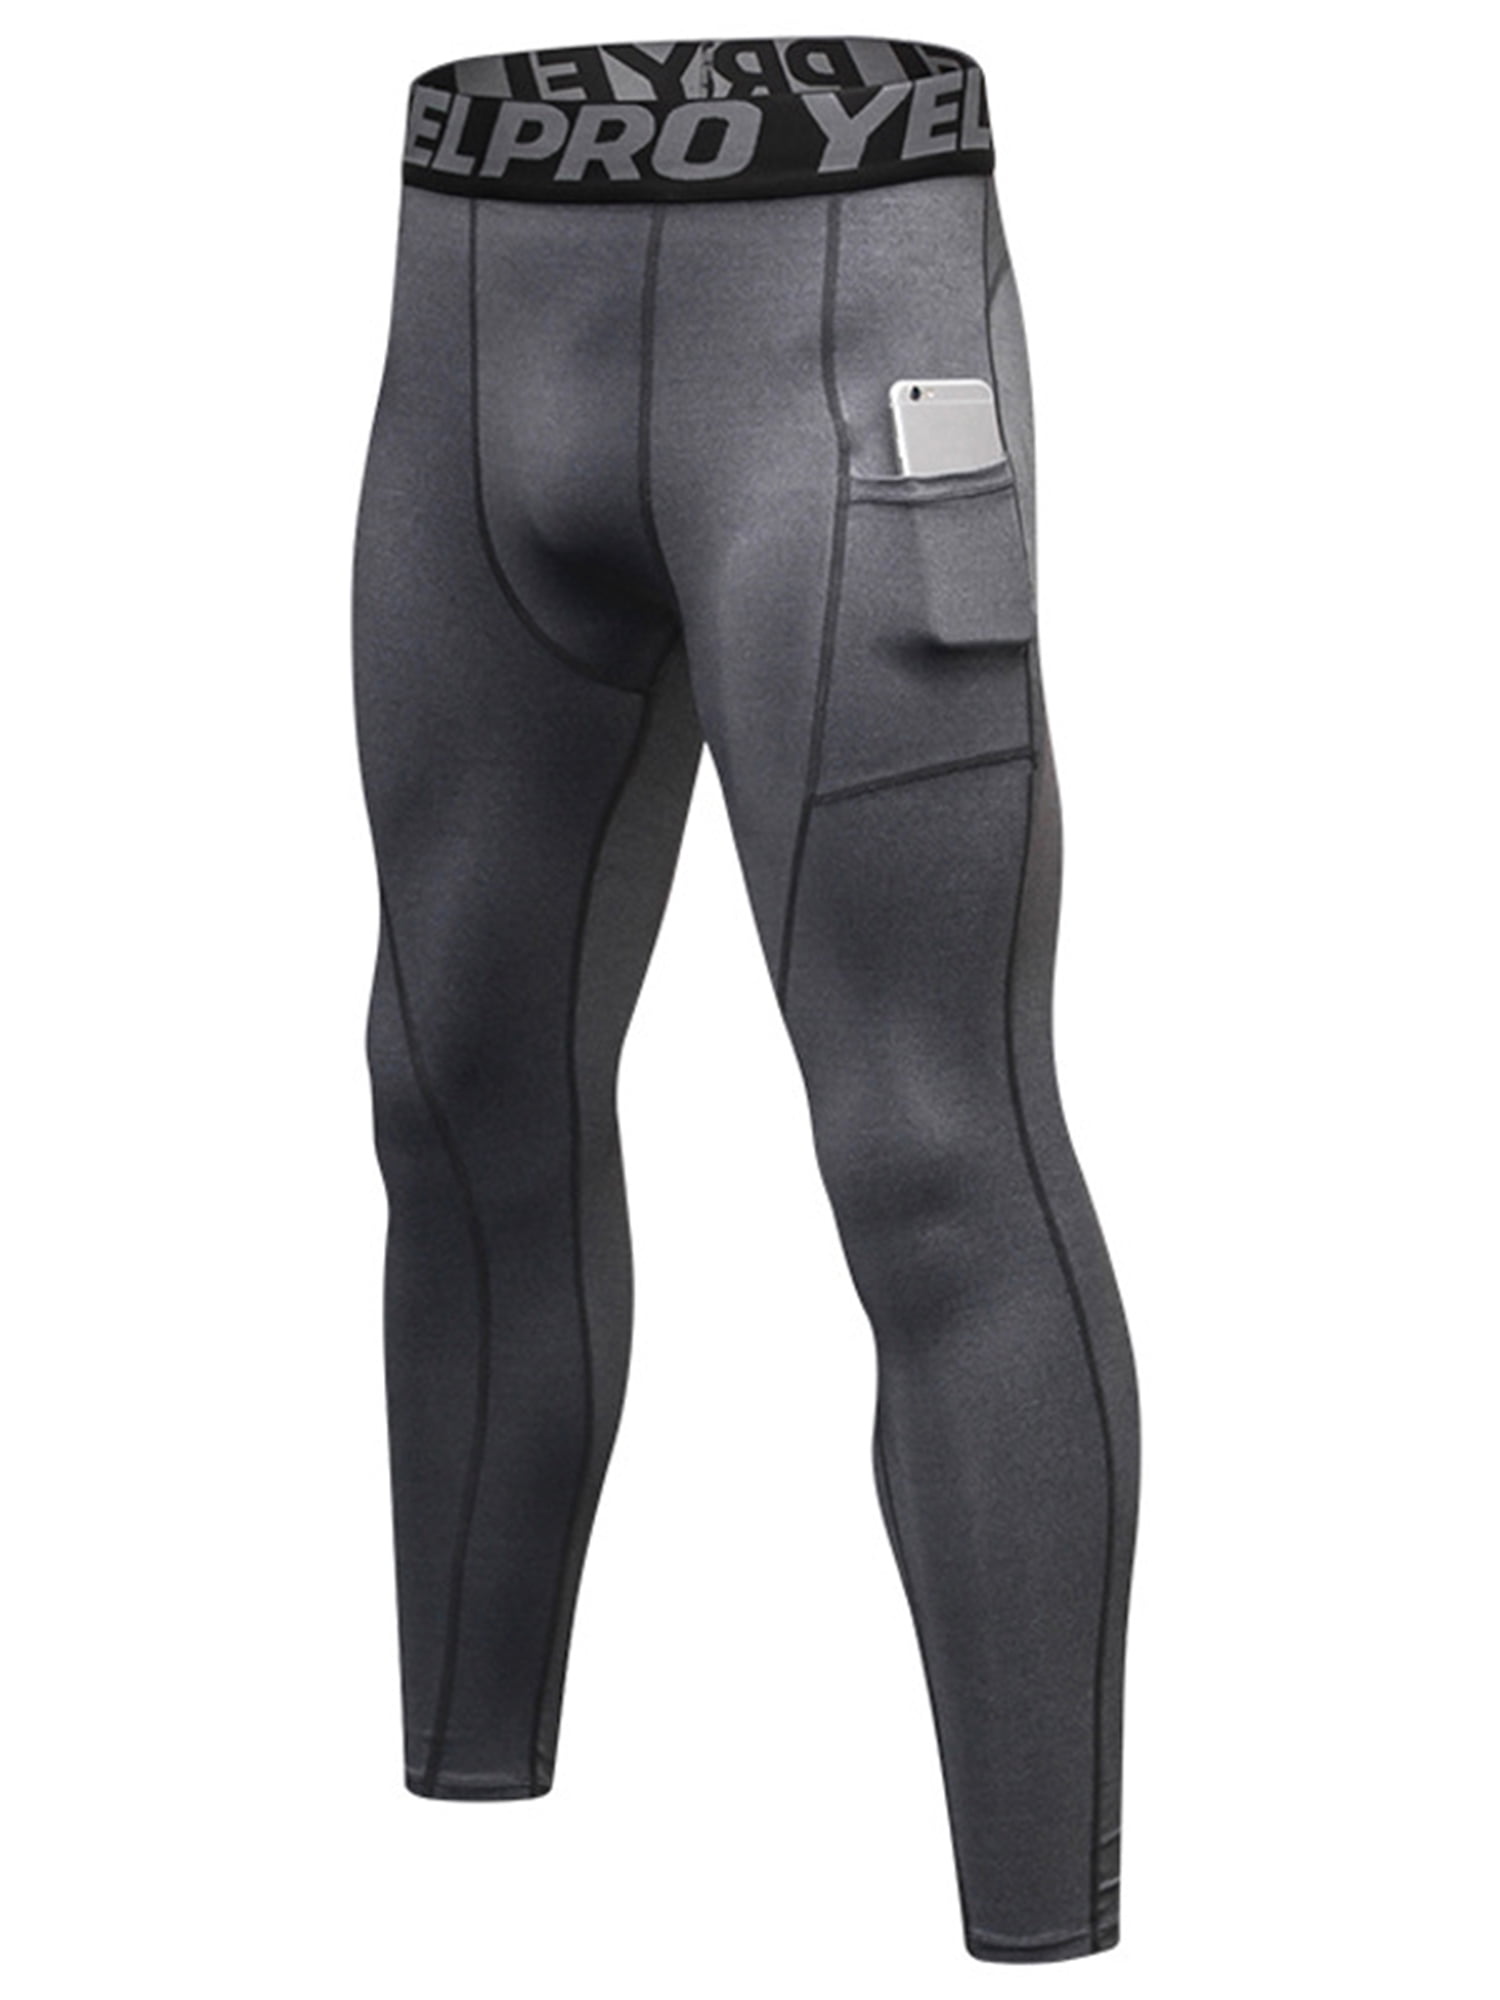 Mens Workout Leggings Compression Pants Athletic Running Gym Tights With Side Pockets Dry Fit